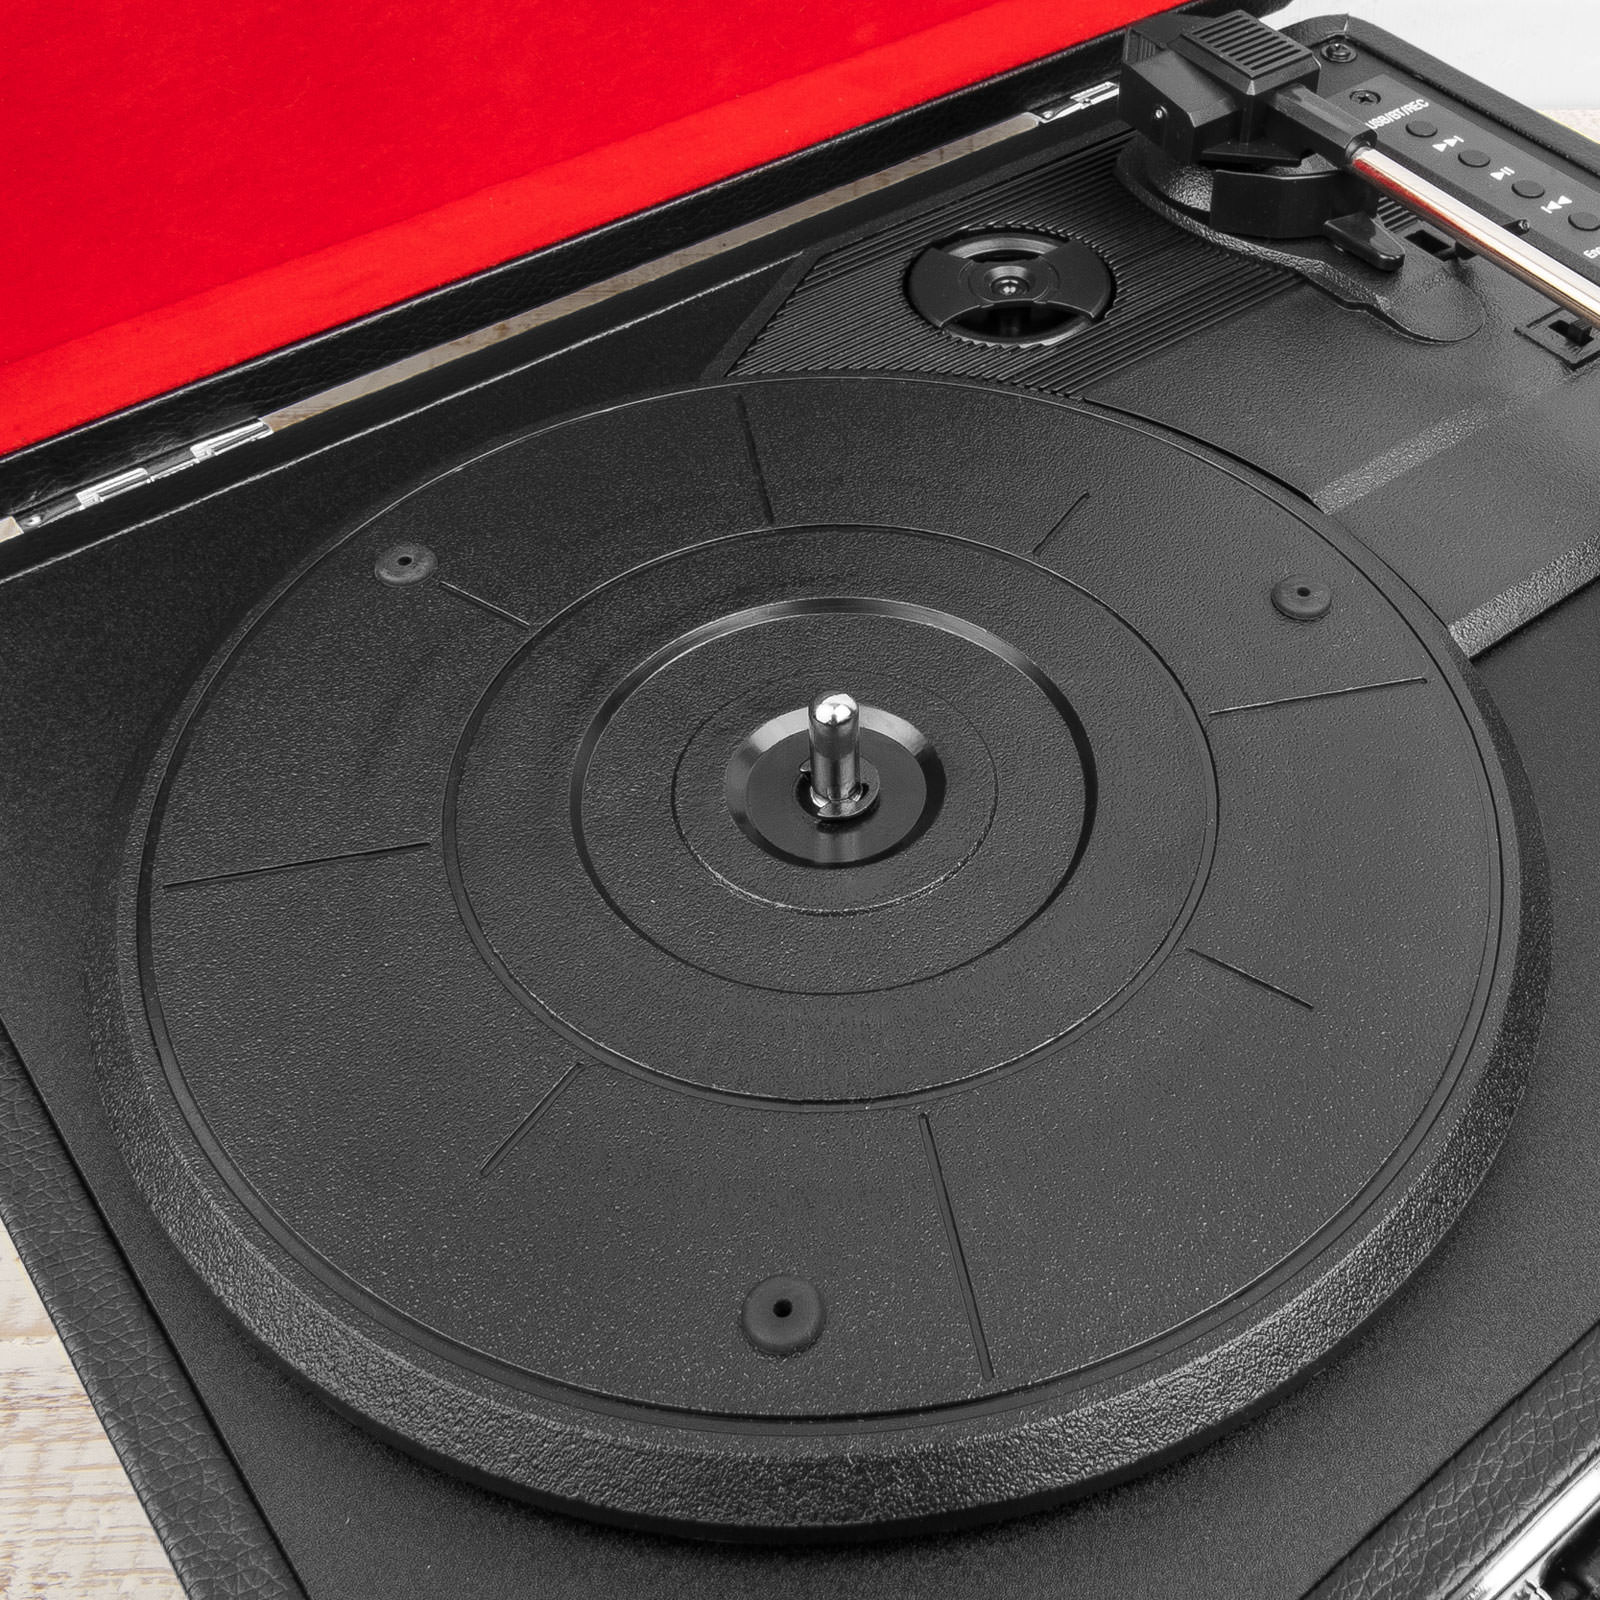 Caseflex Turntable Record Player Briefcase [3 Speed] Vinyl Recorder & MP3 Player with Built-In Bluetooth Stereo Speakers - Black & Red